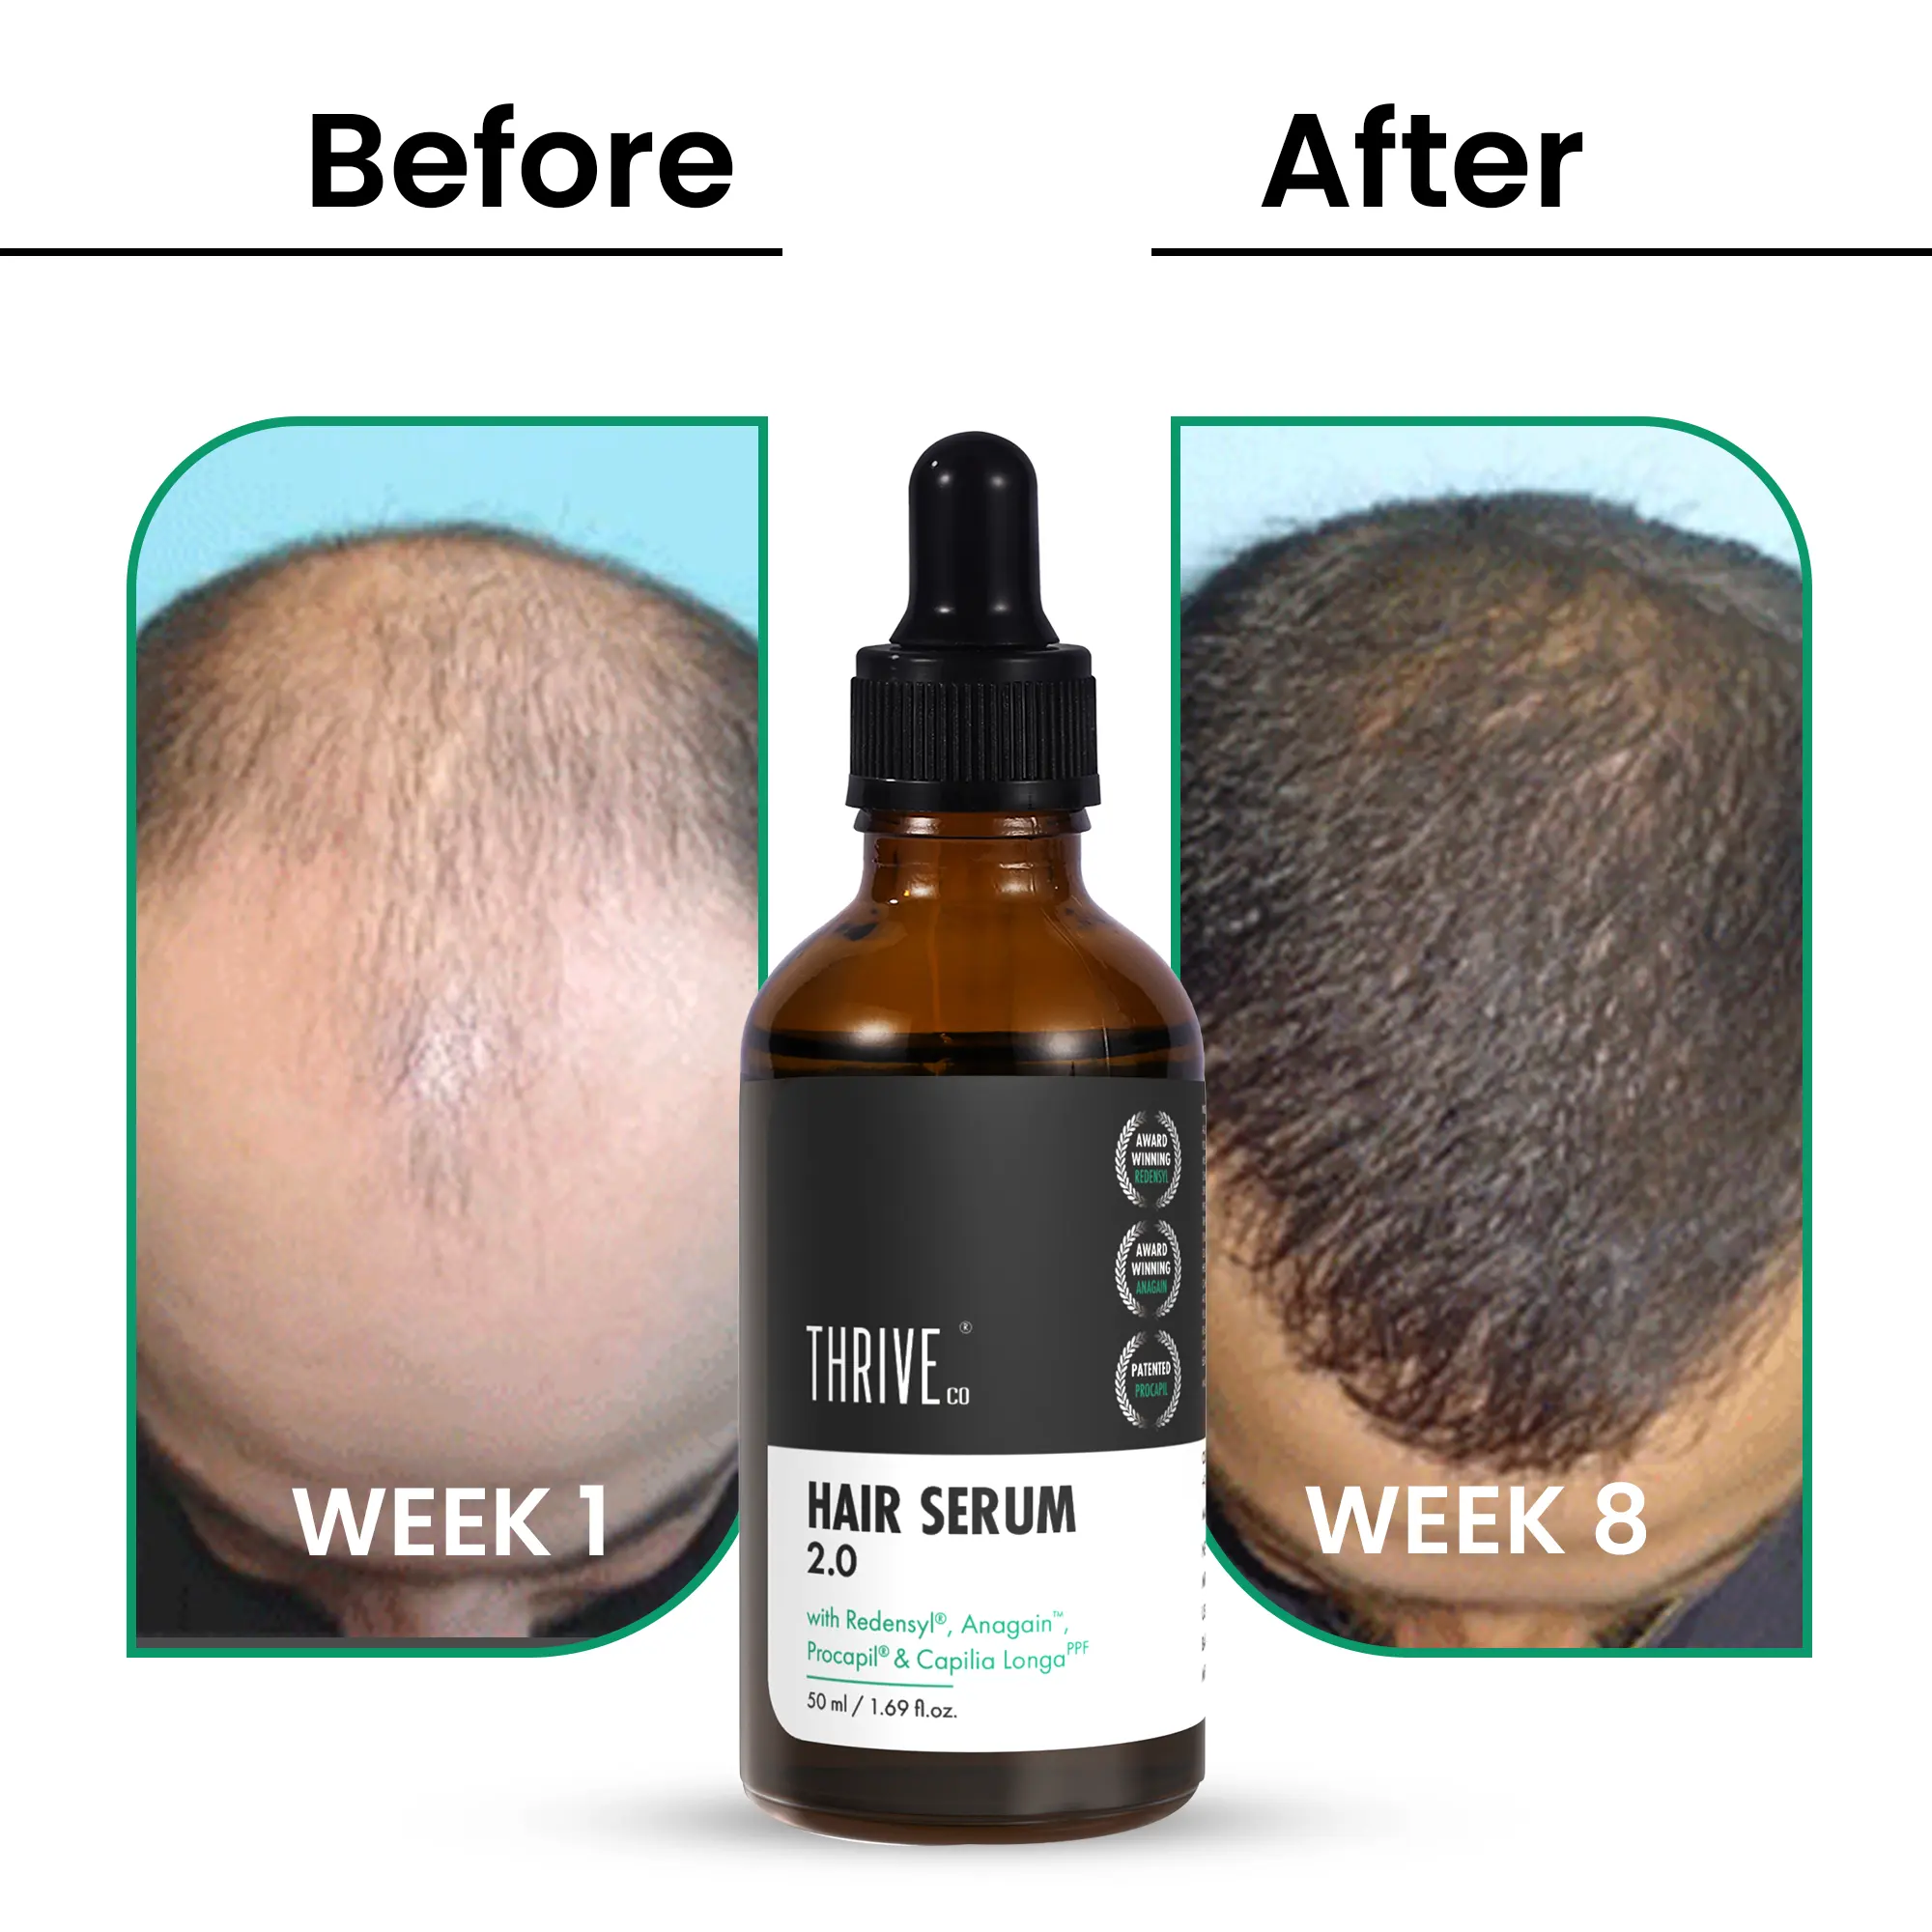 Advanced Hair Growth Serum Promotes Regrowth Reduces Hairfall for Men and Women